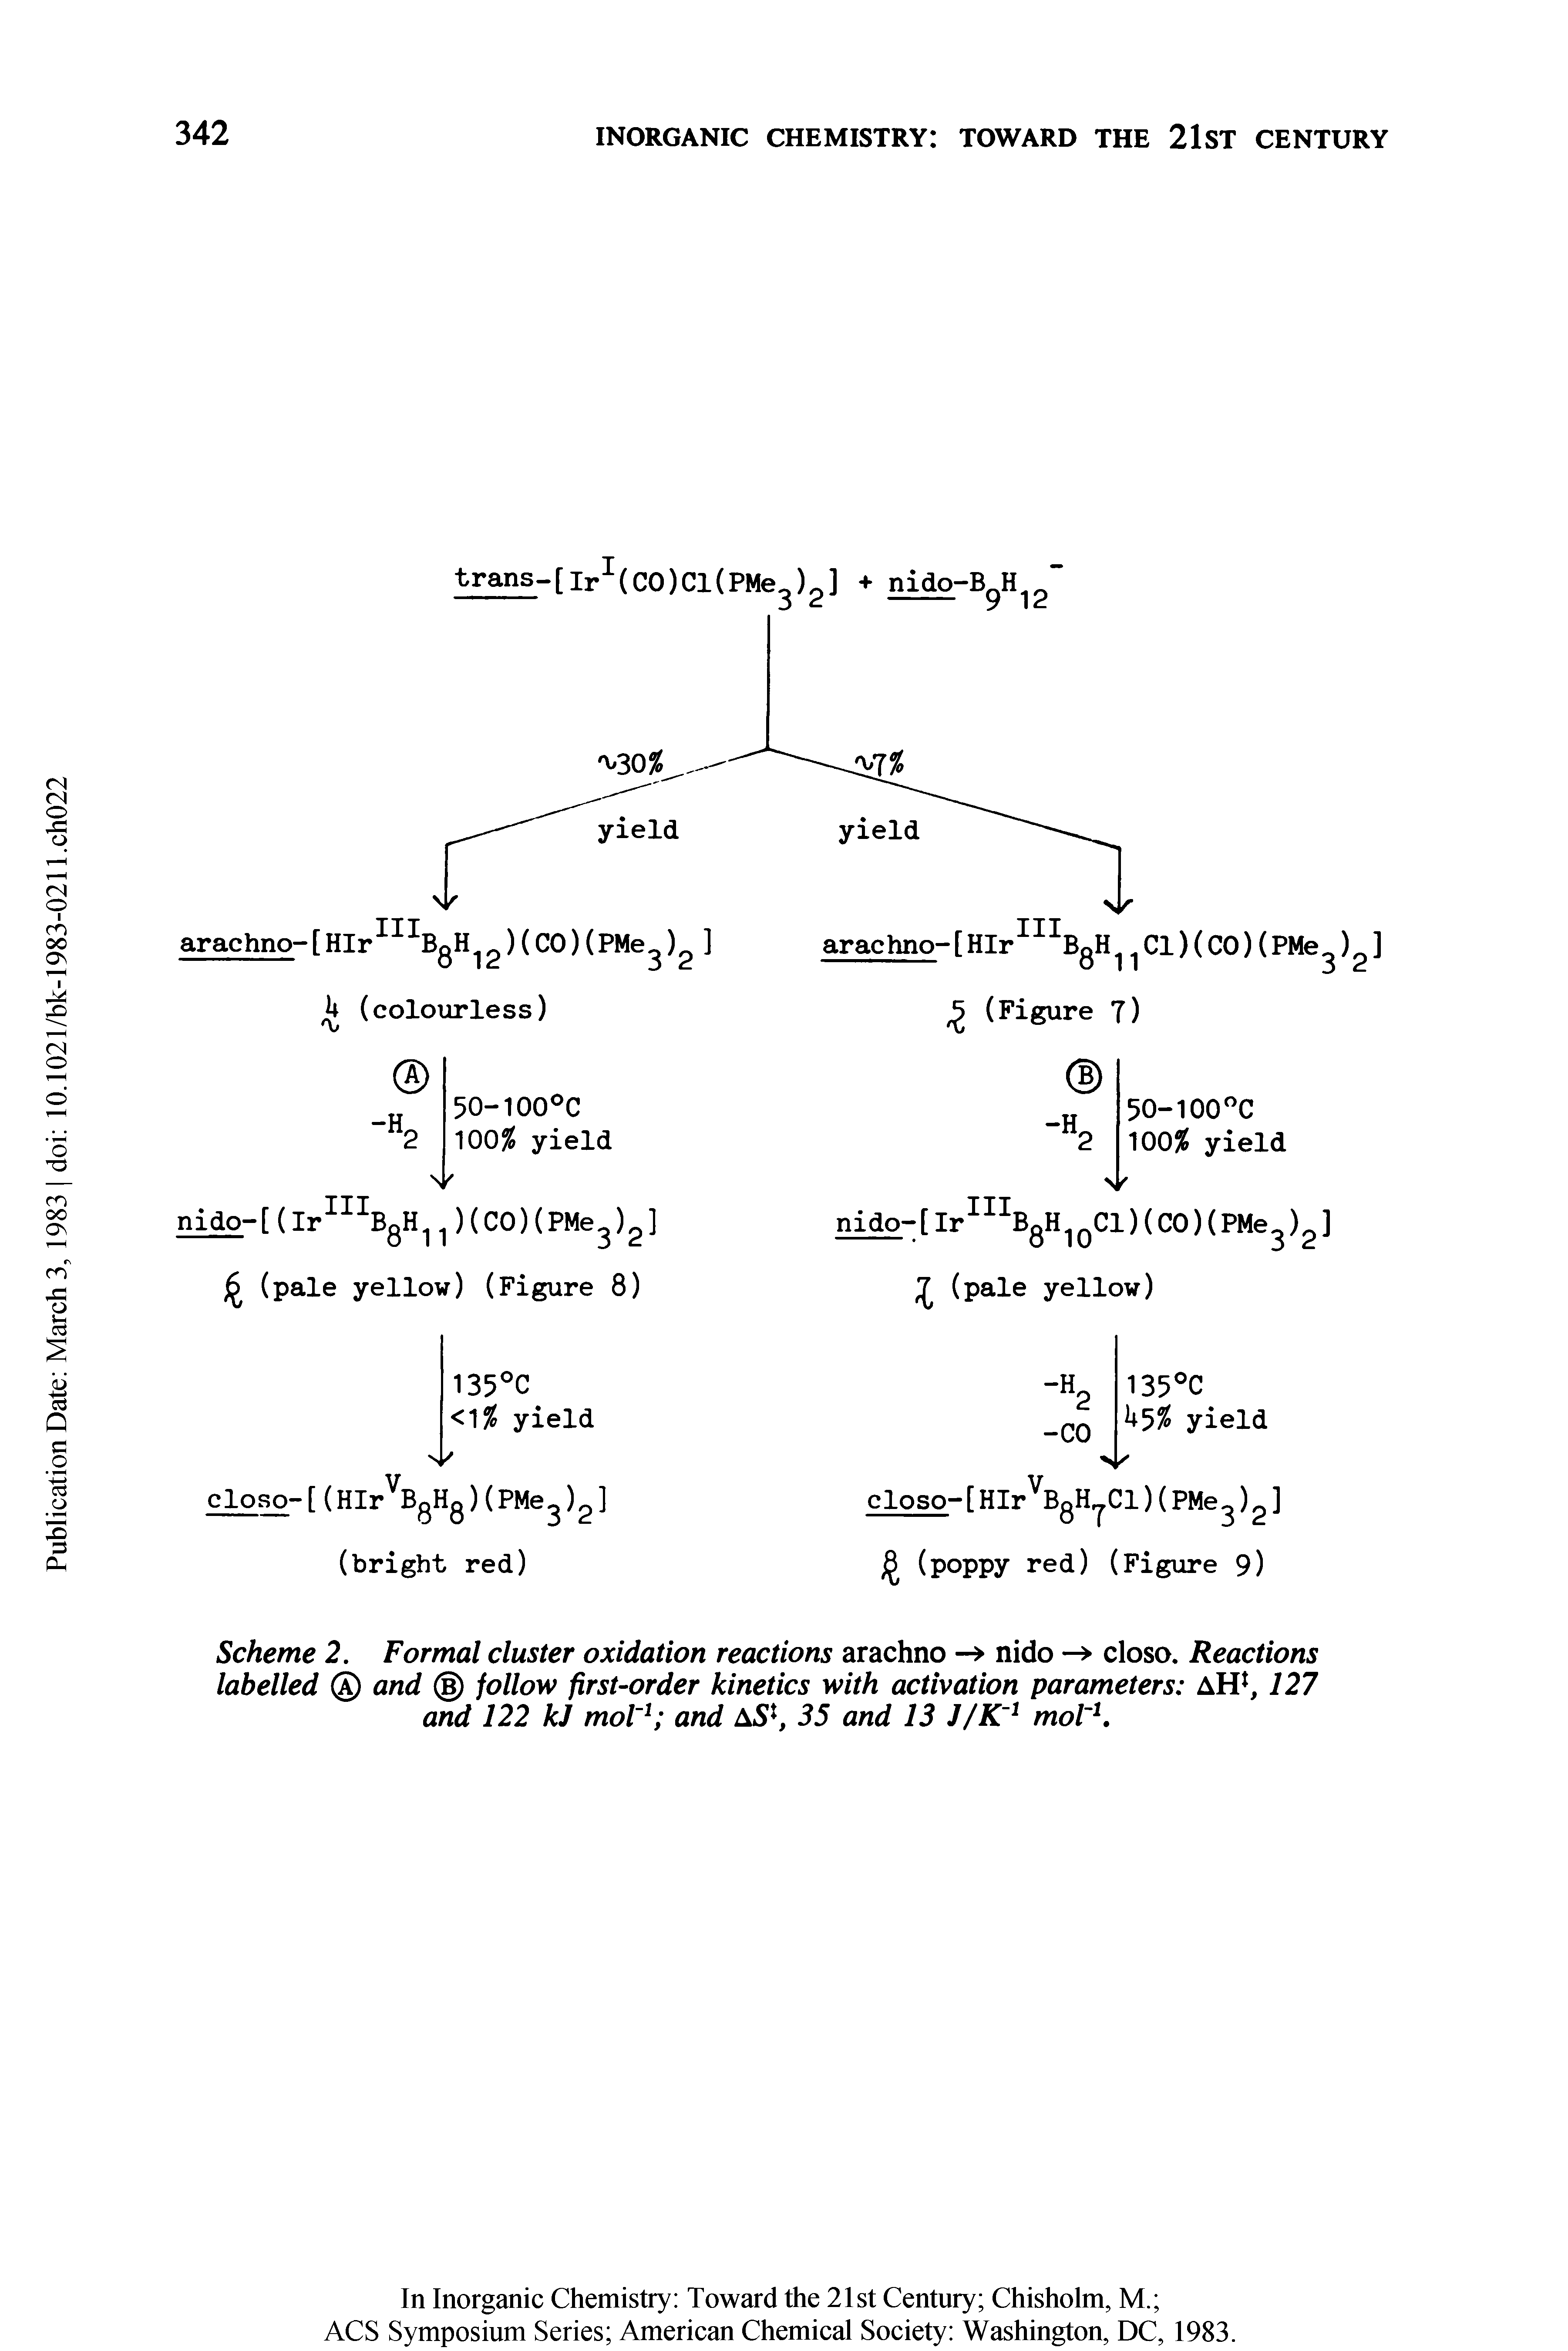 Scheme 2. Formal cluster oxidation reactions arachno - nido — closo. Reactions labelled and follow first-order kinetics with activation parameters AH, 127 and 122 kJ mol 1 and AS1, 35 and 13 J/K 1 mol 1.